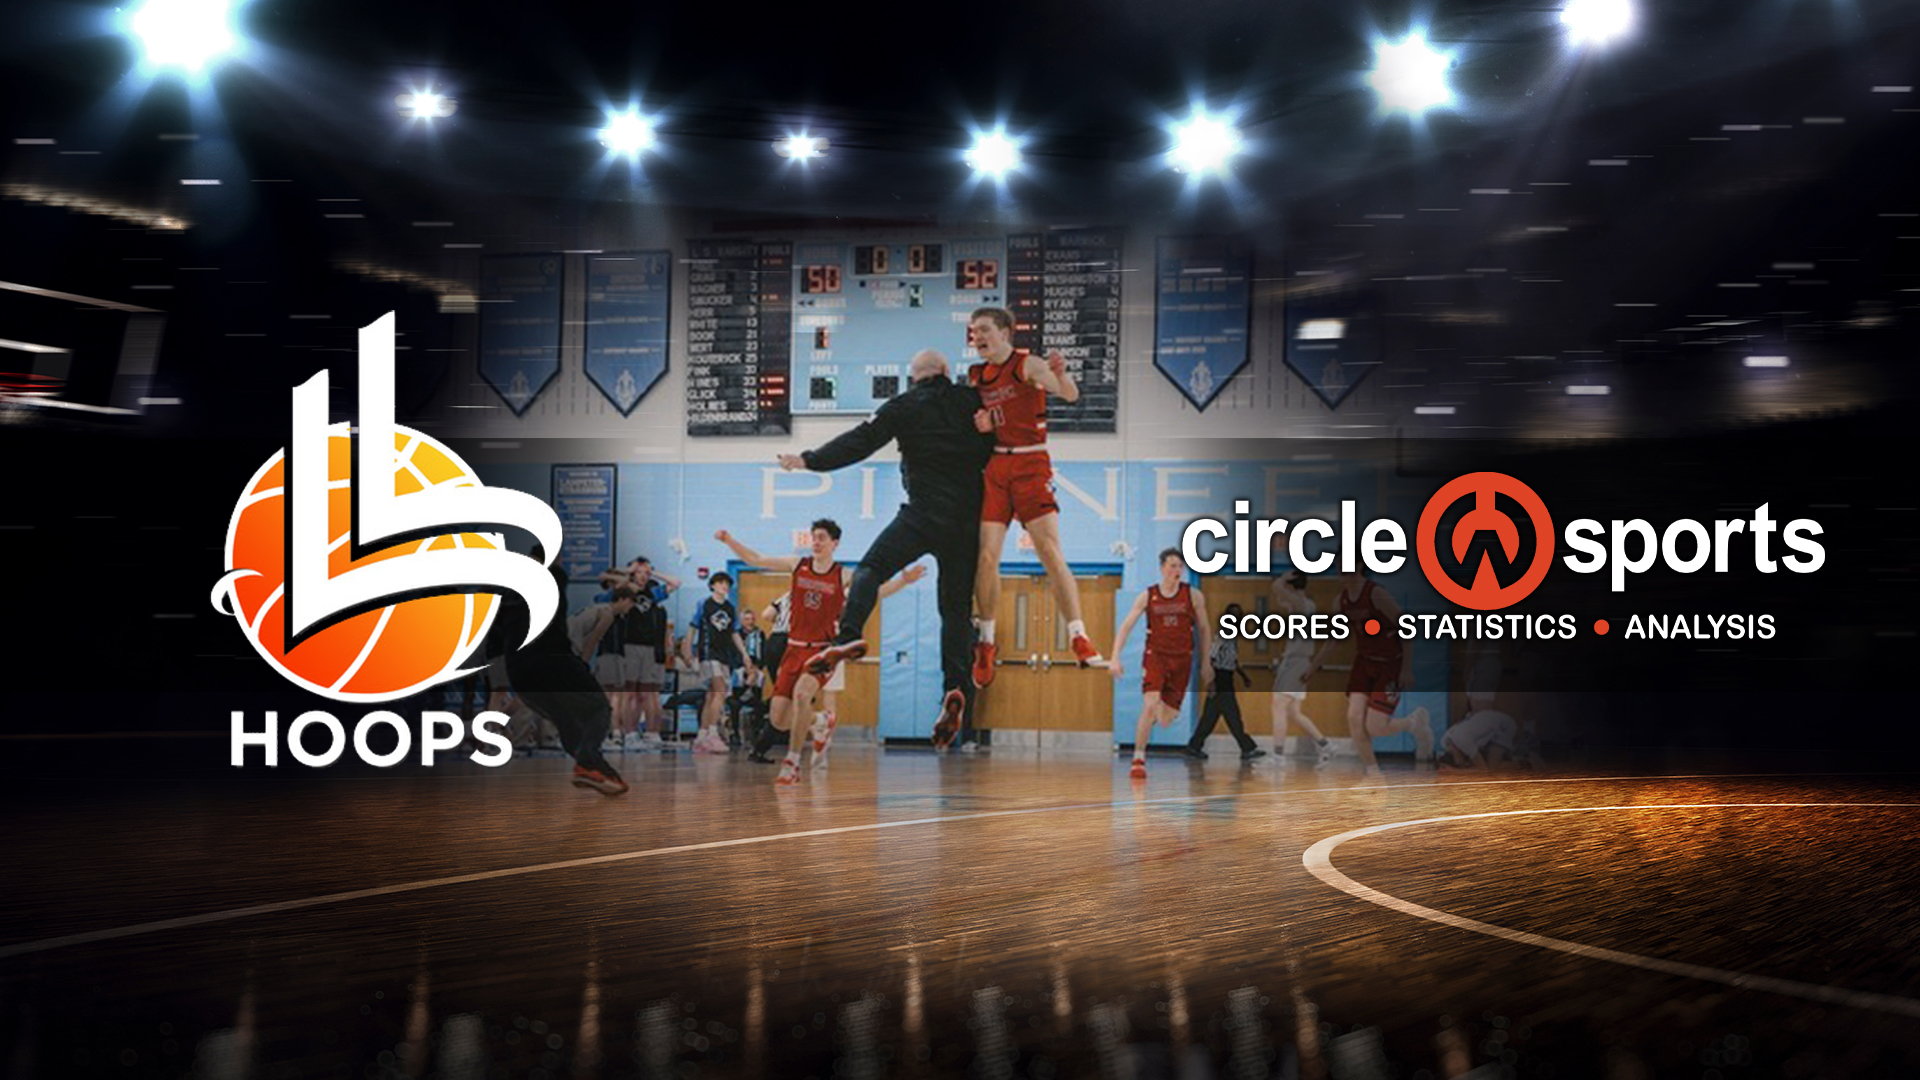 Circle W Sports Launches Redesign Of LLhoops